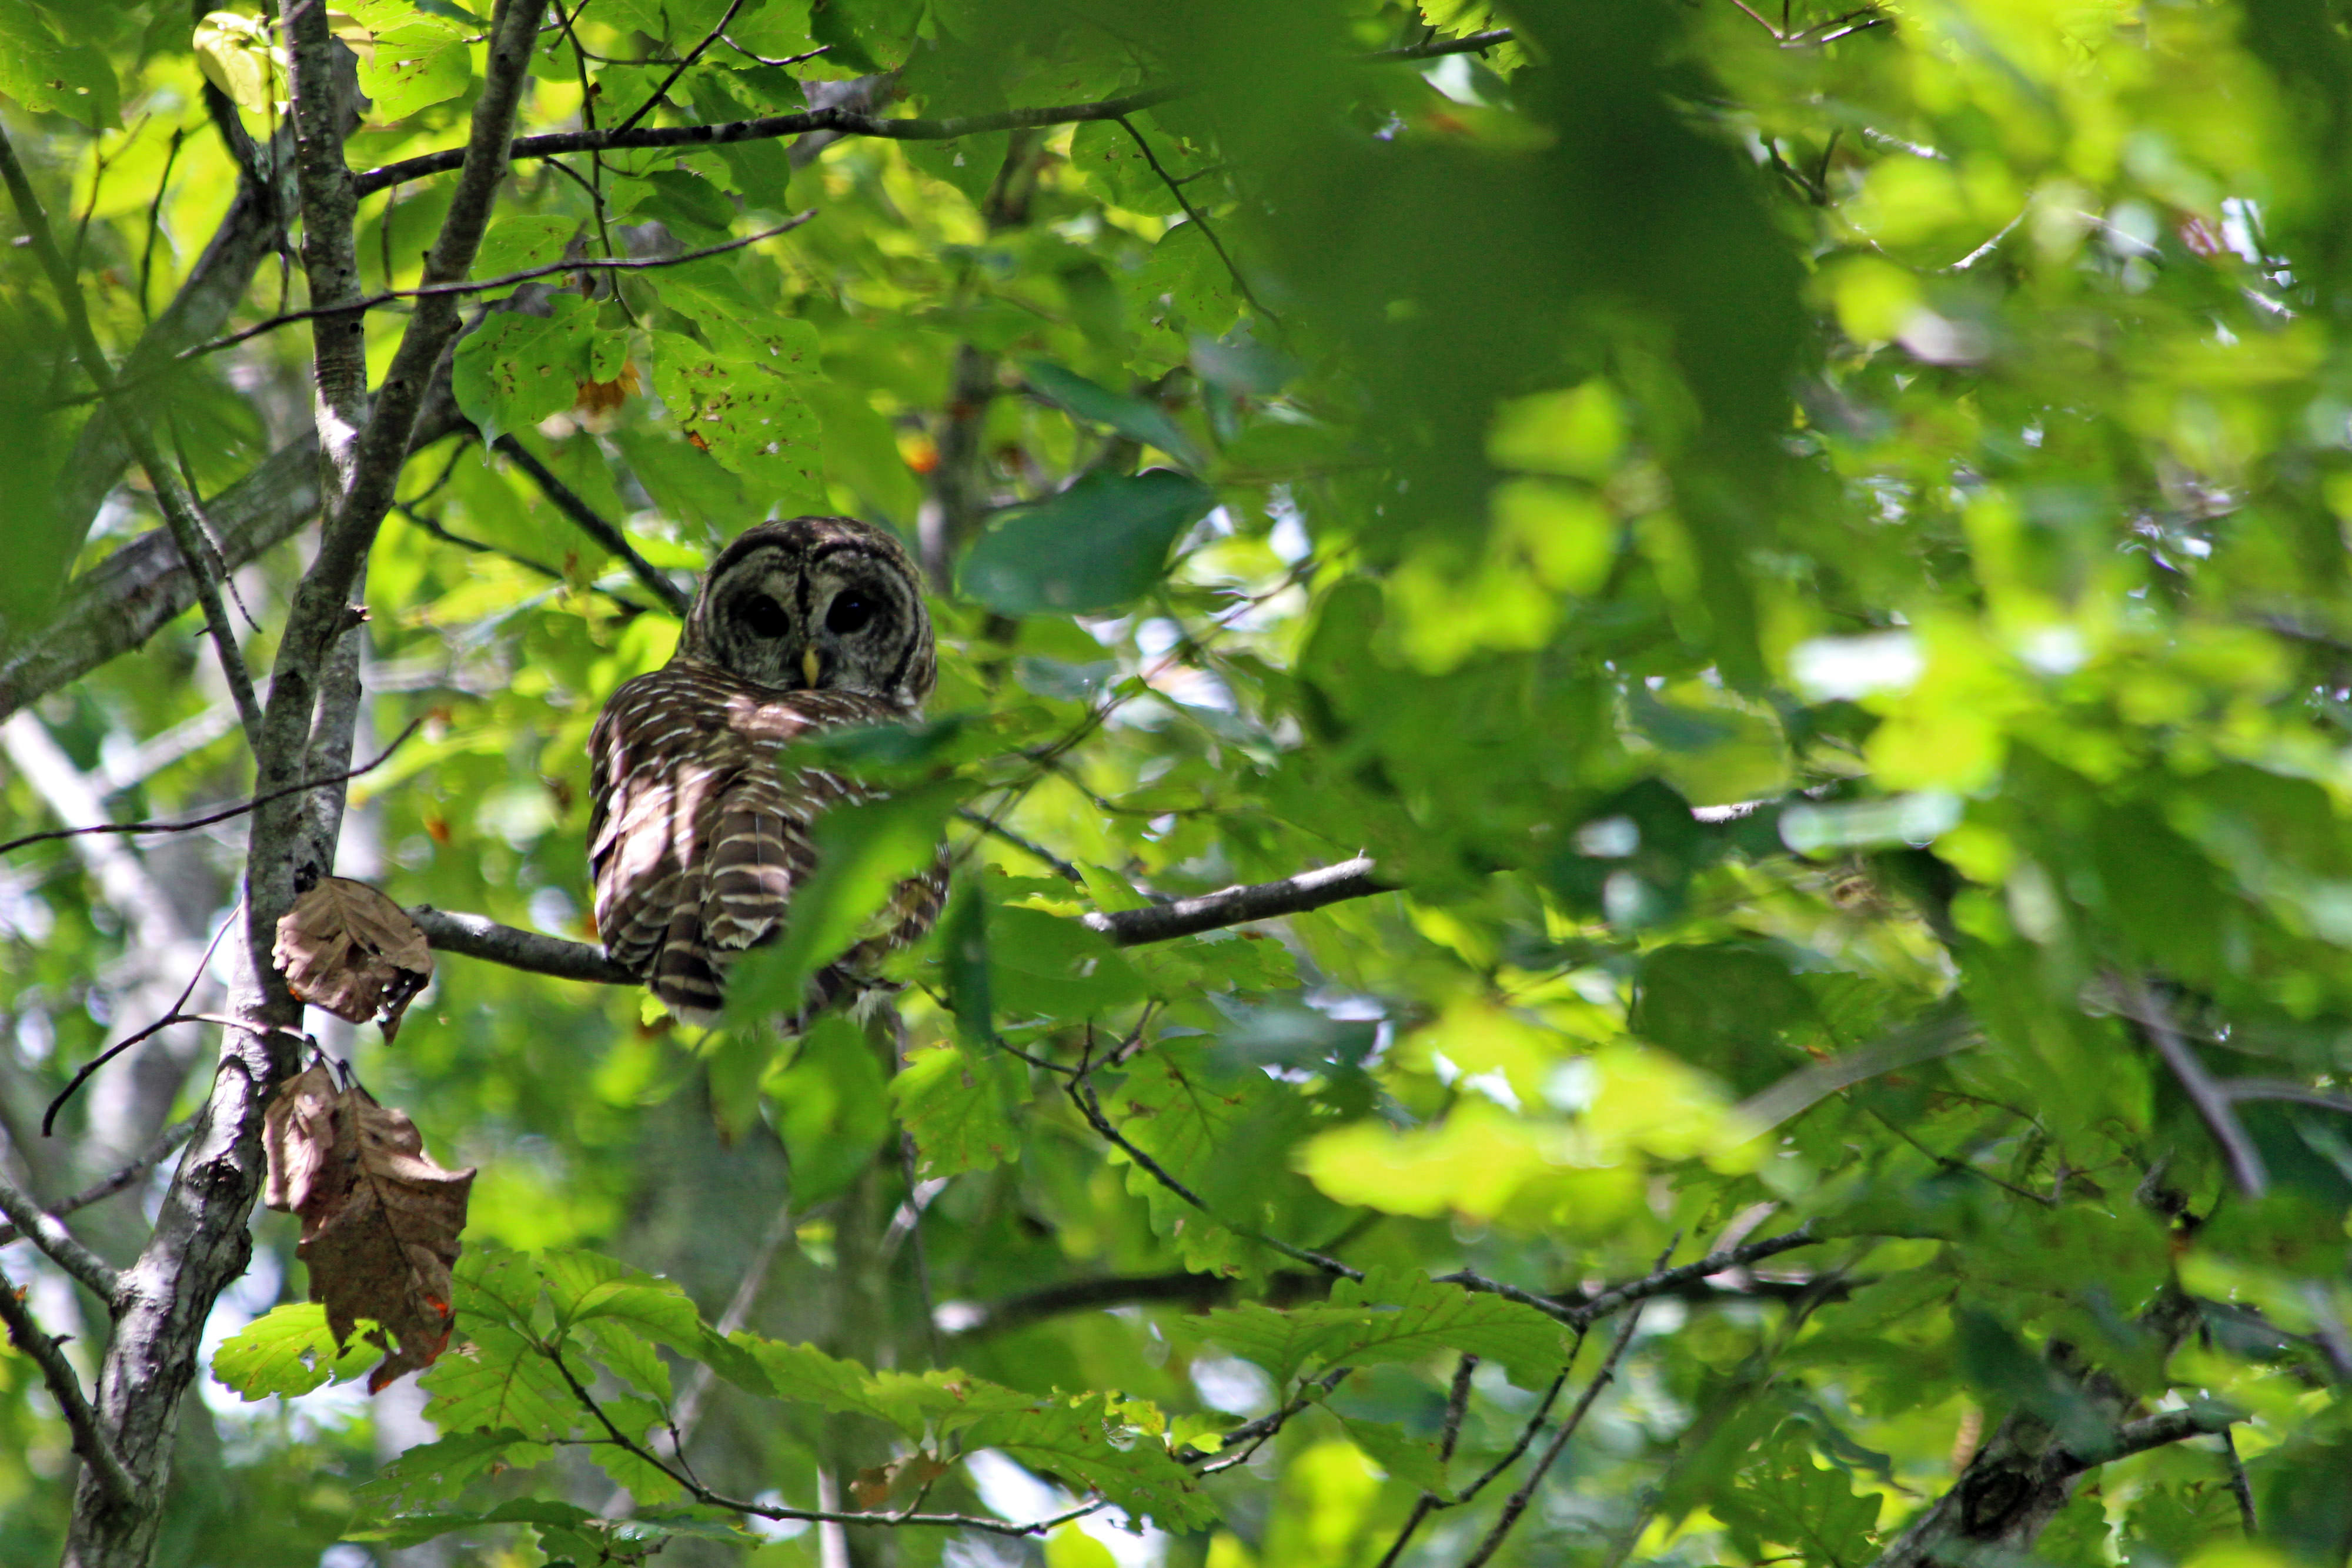 An owl sits on a branch high up in a tree almost obscured by green leaves.